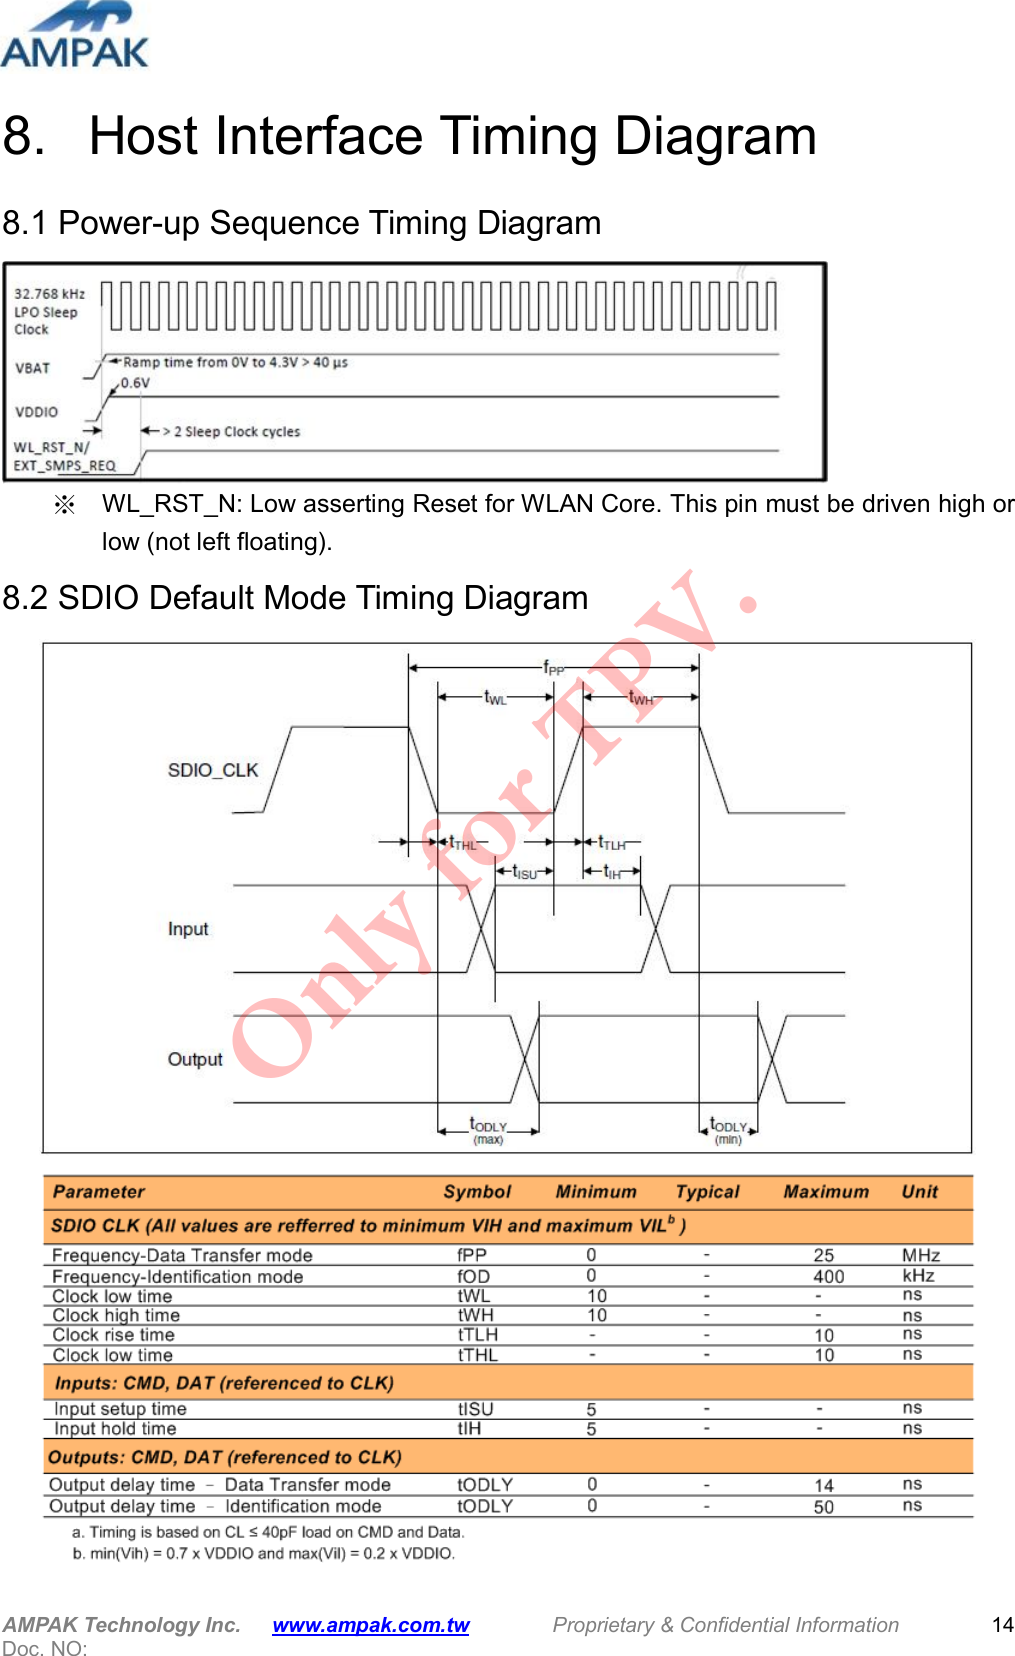  AMPAK Technology Inc.      www.ampak.com.tw        Proprietary &amp; Confidential Information       Doc. NO:   14 8.   Host Interface Timing Diagram 8.1 Power-up Sequence Timing Diagram  ※  WL_RST_N: Low asserting Reset for WLAN Core. This pin must be driven high or low (not left floating). 8.2 SDIO Default Mode Timing Diagram   Only for TPV.